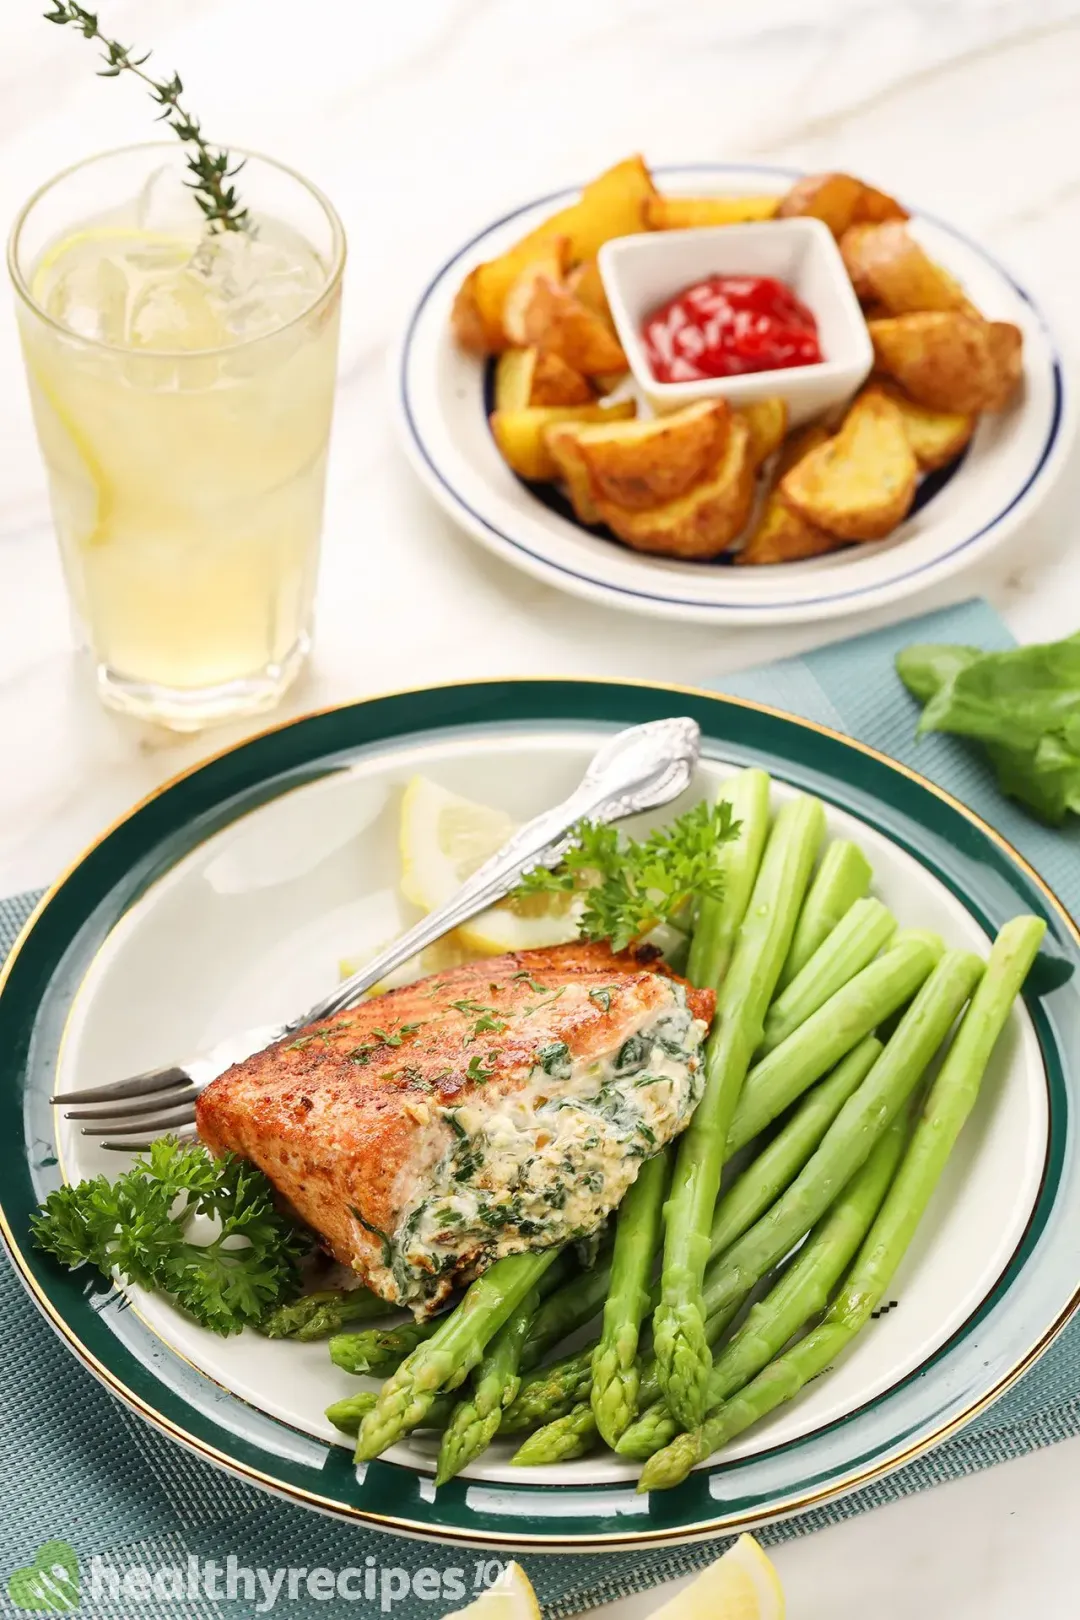 What To Serve With Stuffed Salmon